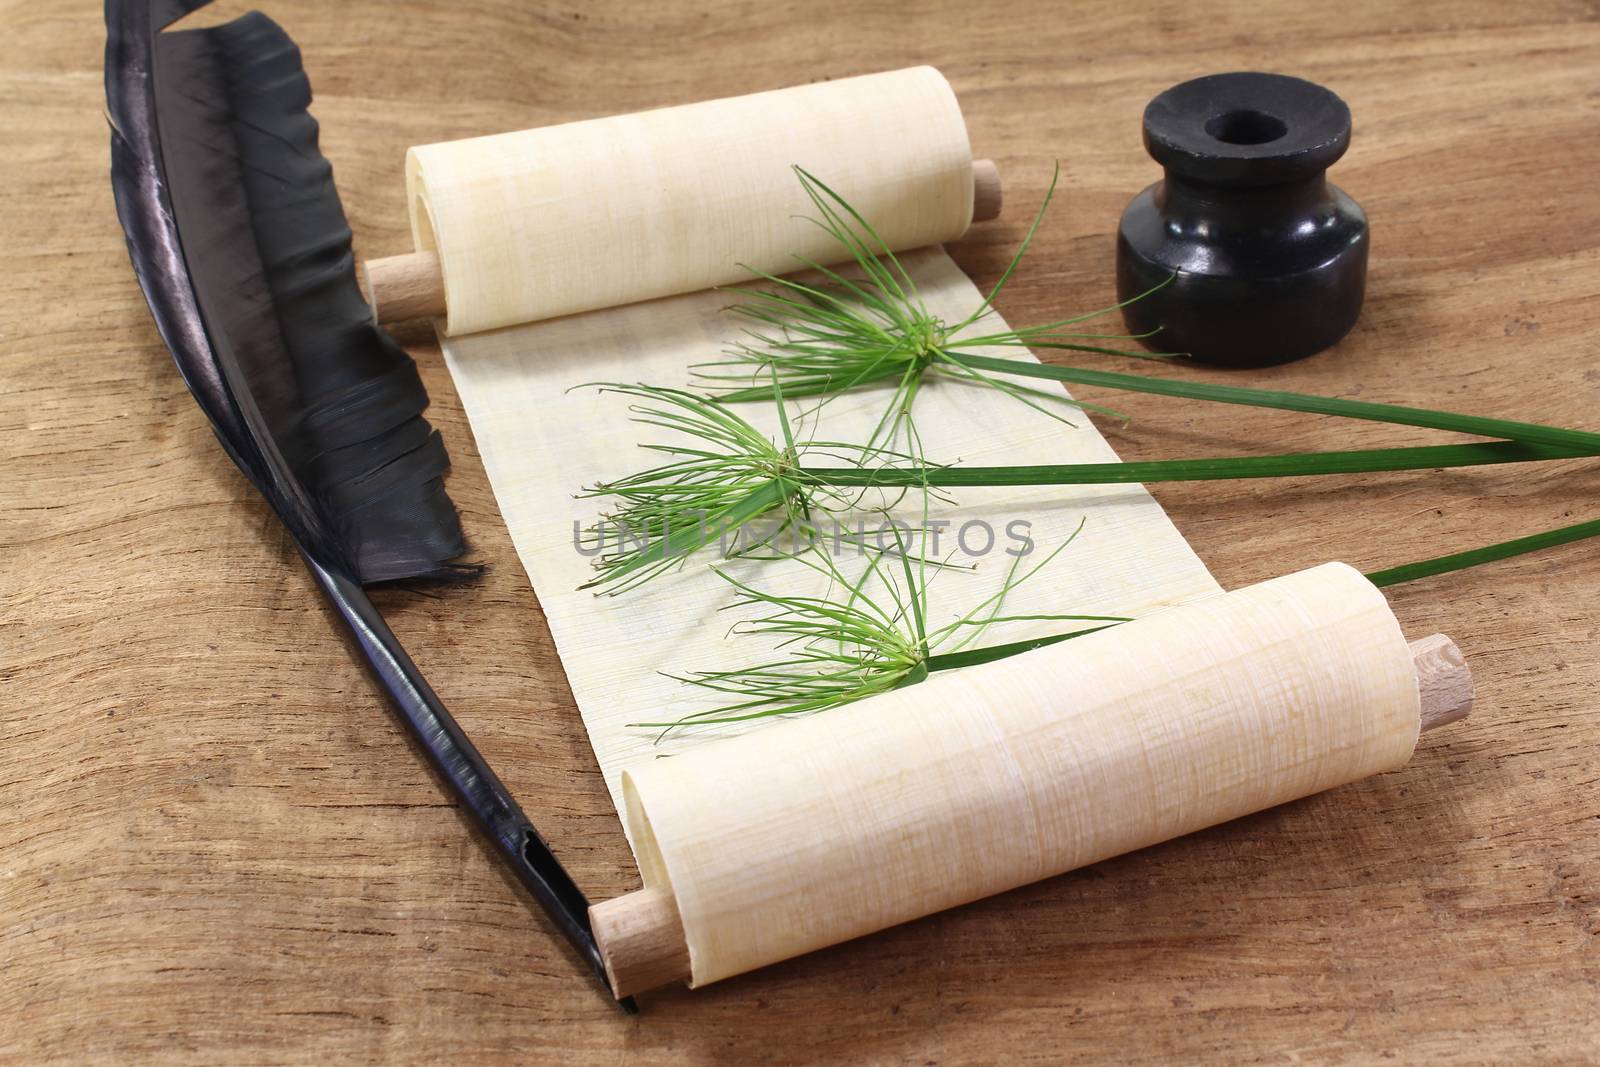 Papyrus scroll with plant by discovery